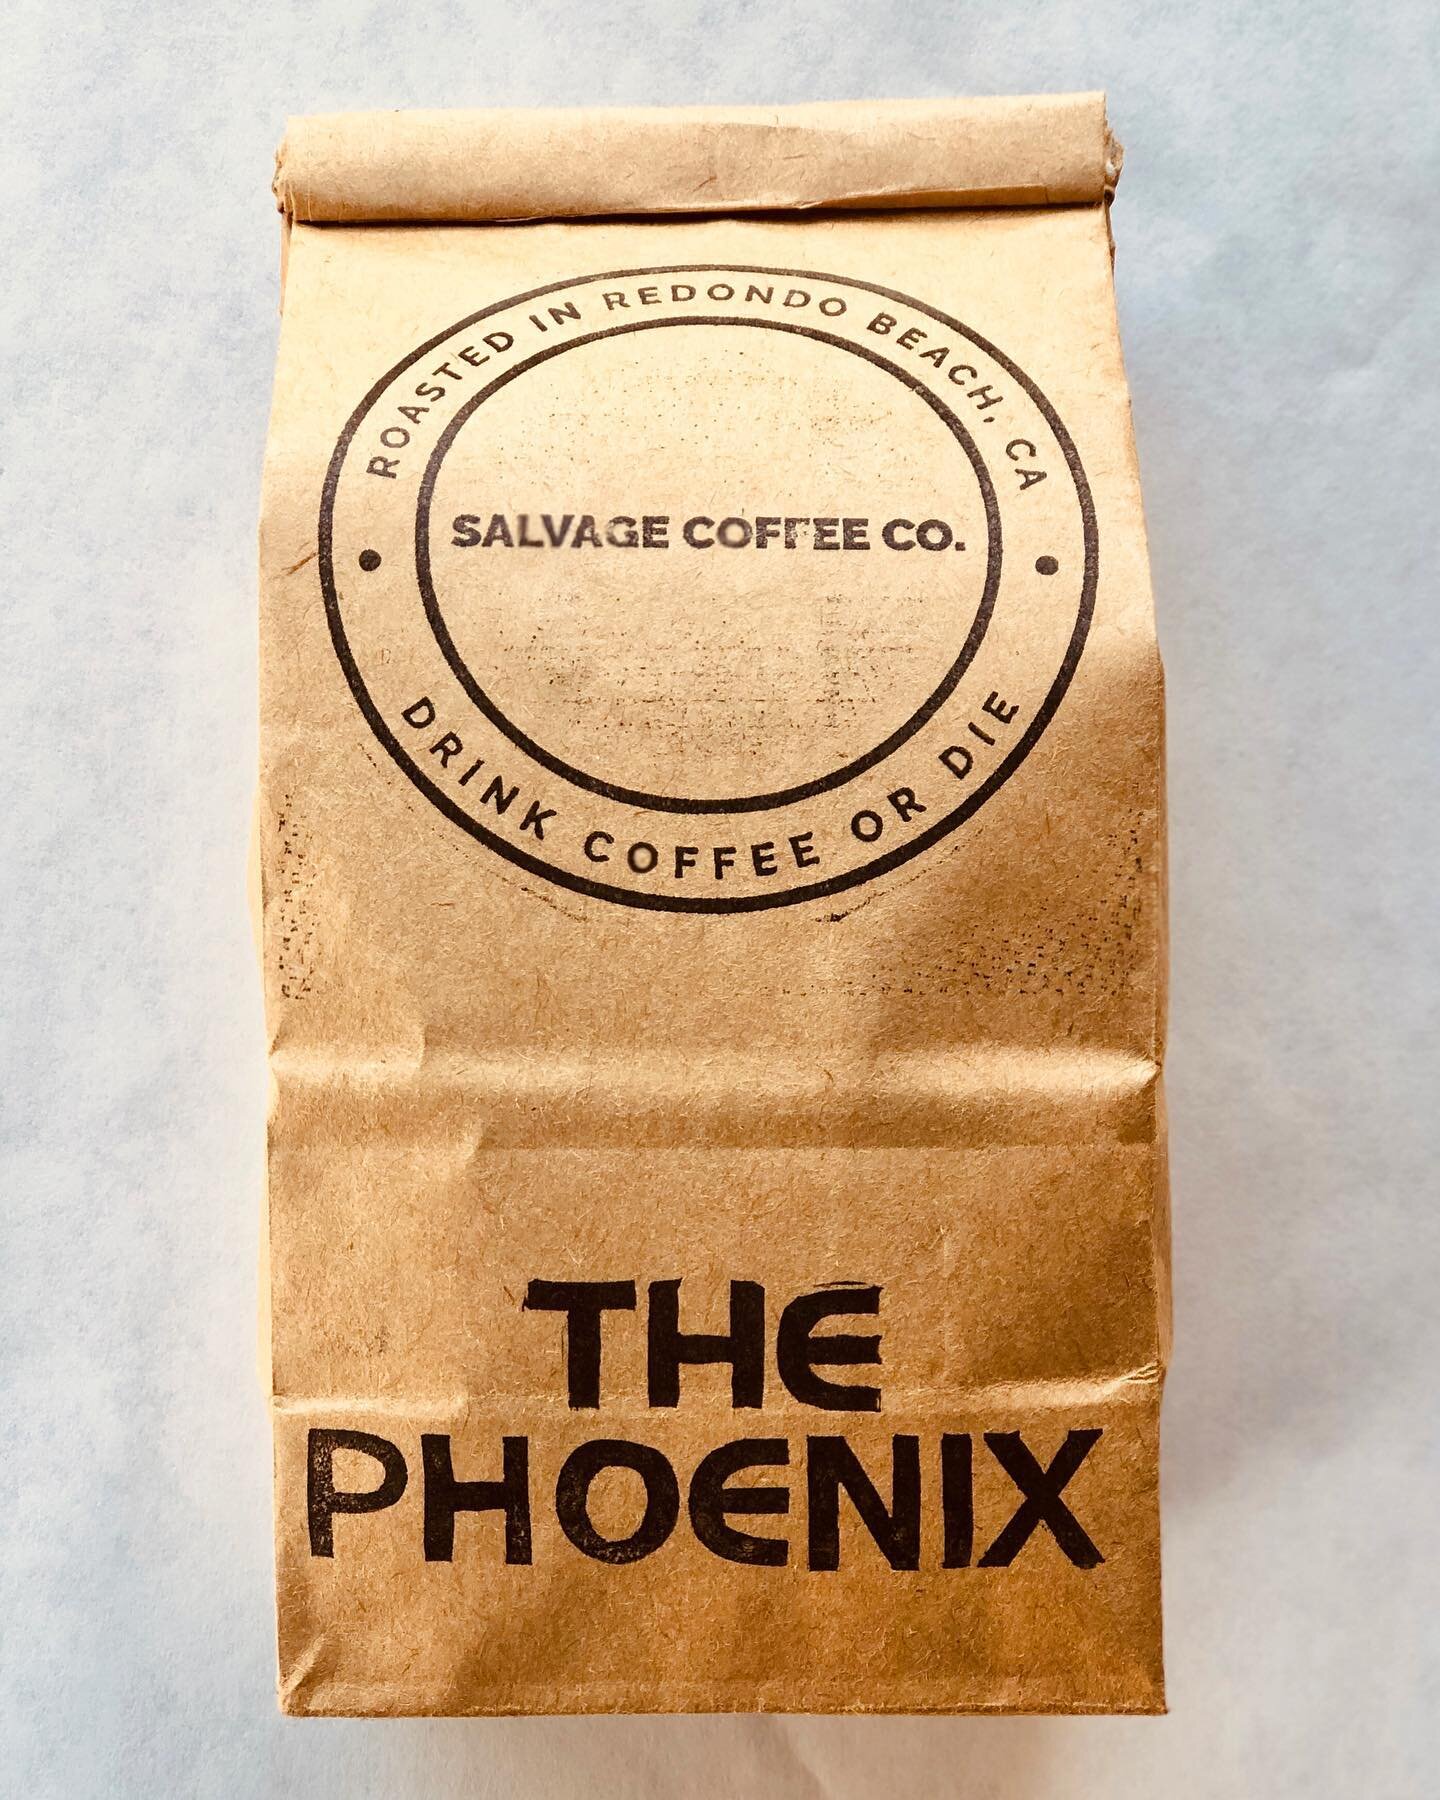 We have roasted a special coffee for a community of people who inspire us! The Phoenix is a free sober active community that has inspired more than 26,000 people across America to believe they have the strength to rise from the ashes of addiction thr